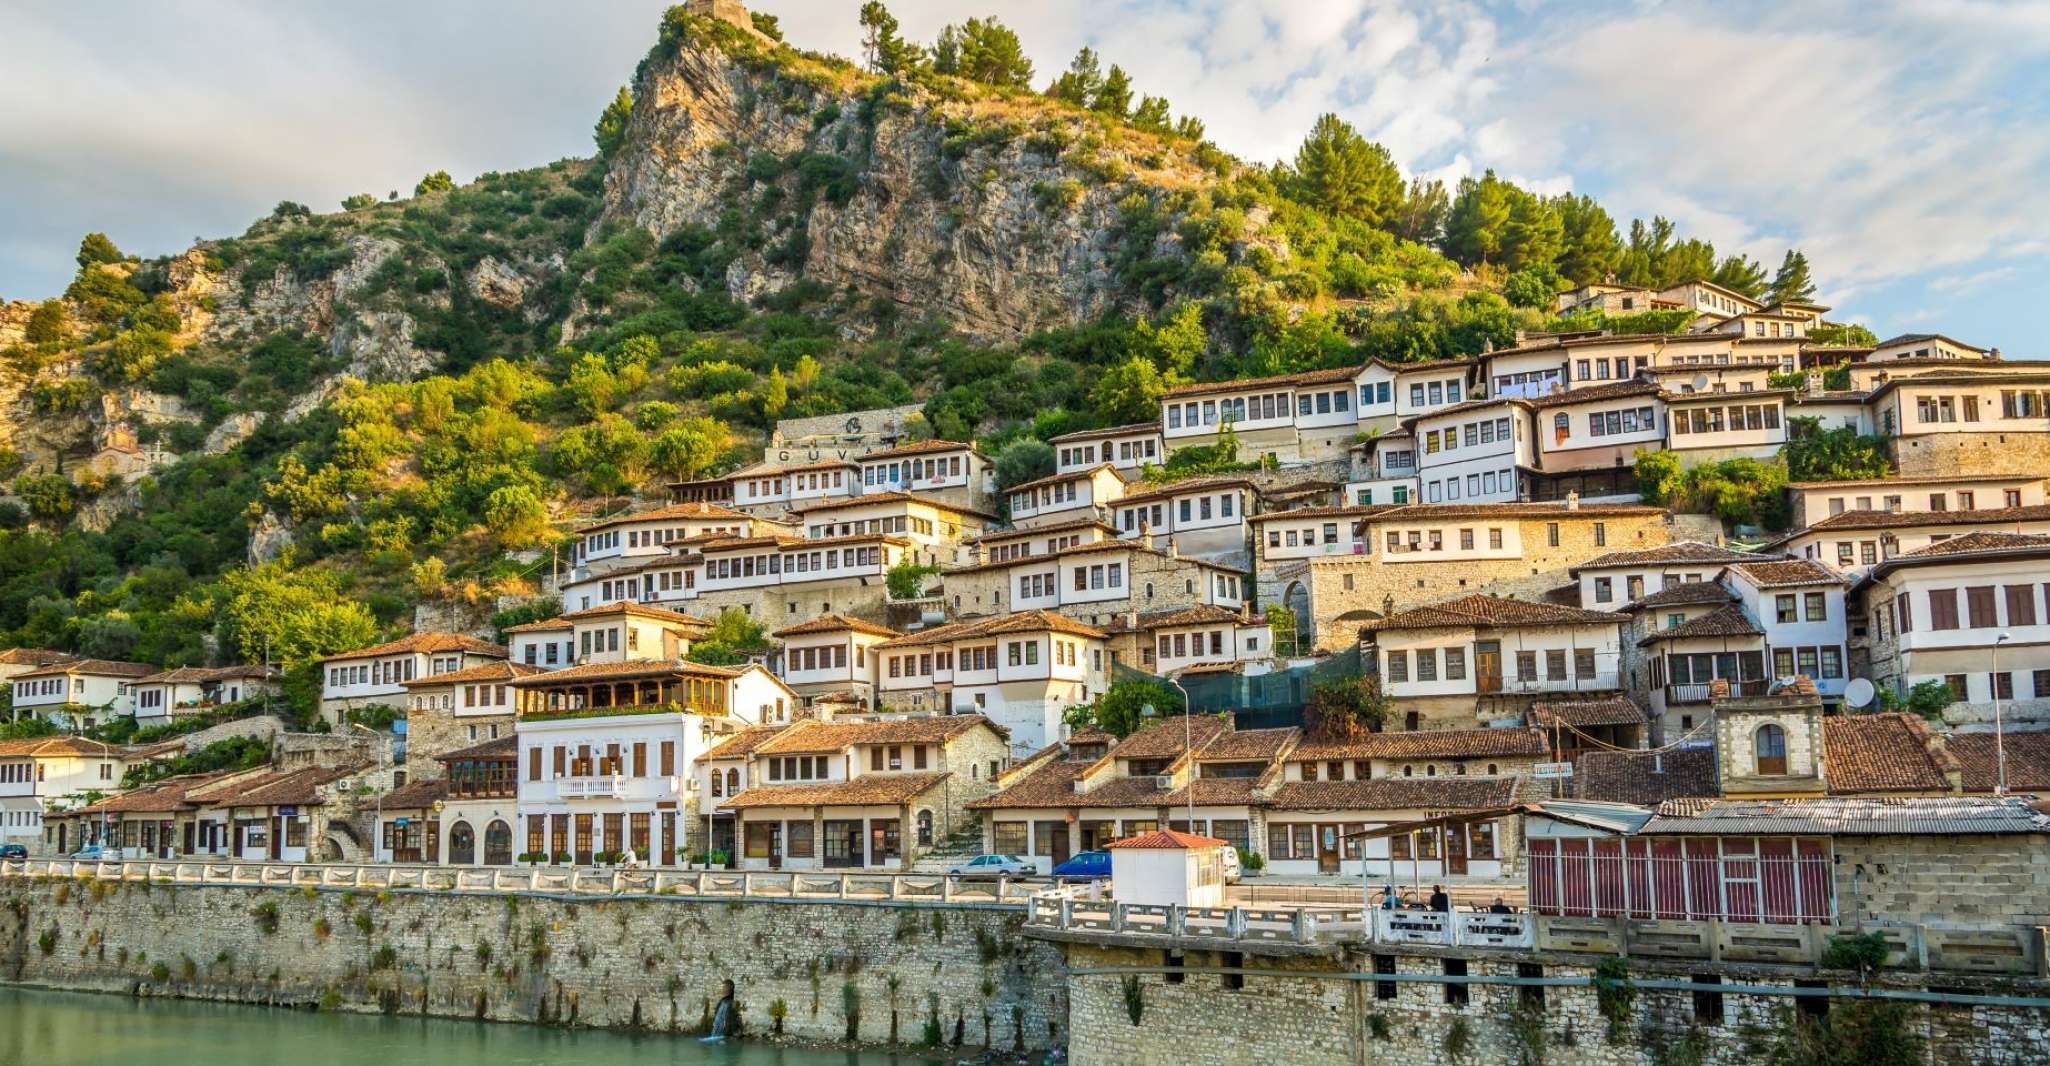 From Durrës, Berat Guided Day Trip with Berat Castle Visit - Housity